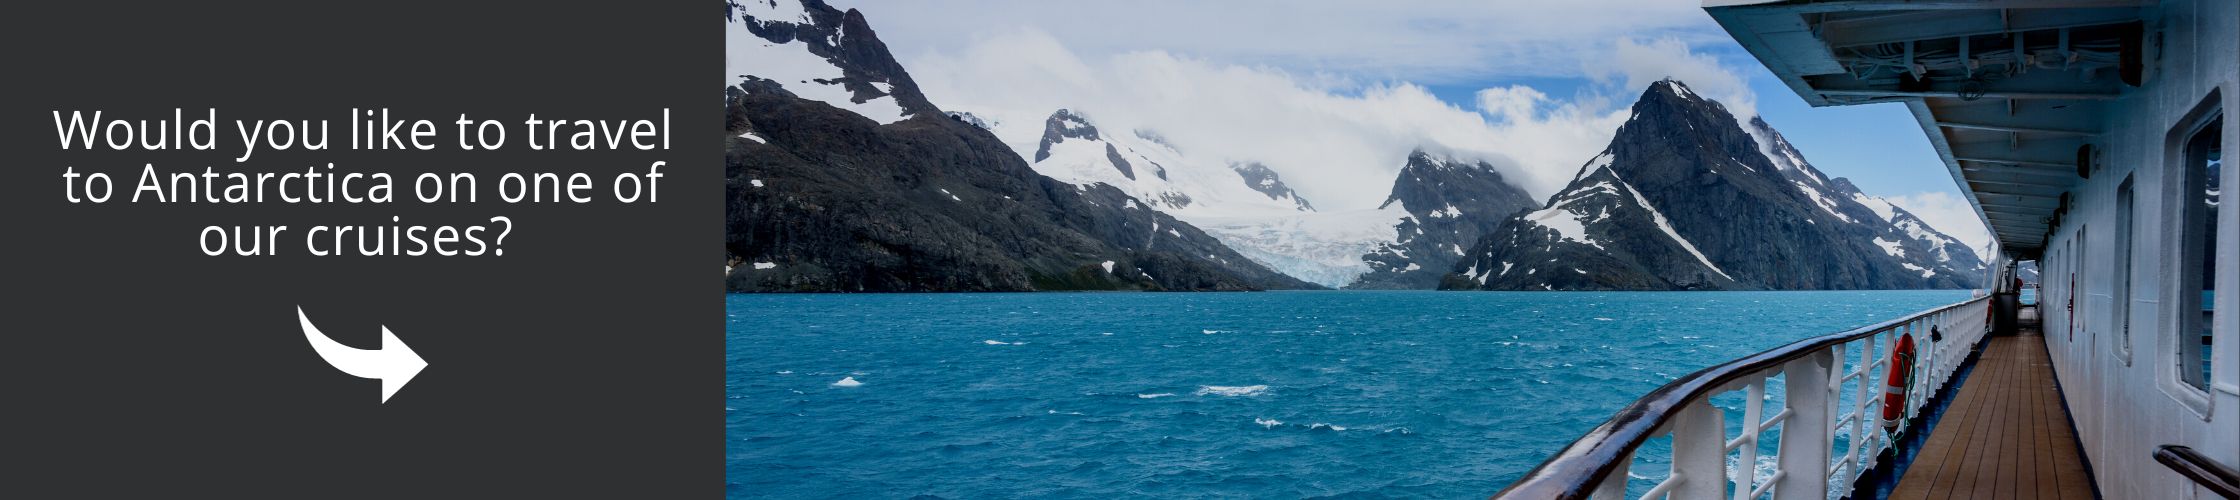 Visit Antarctica on one of our cruises